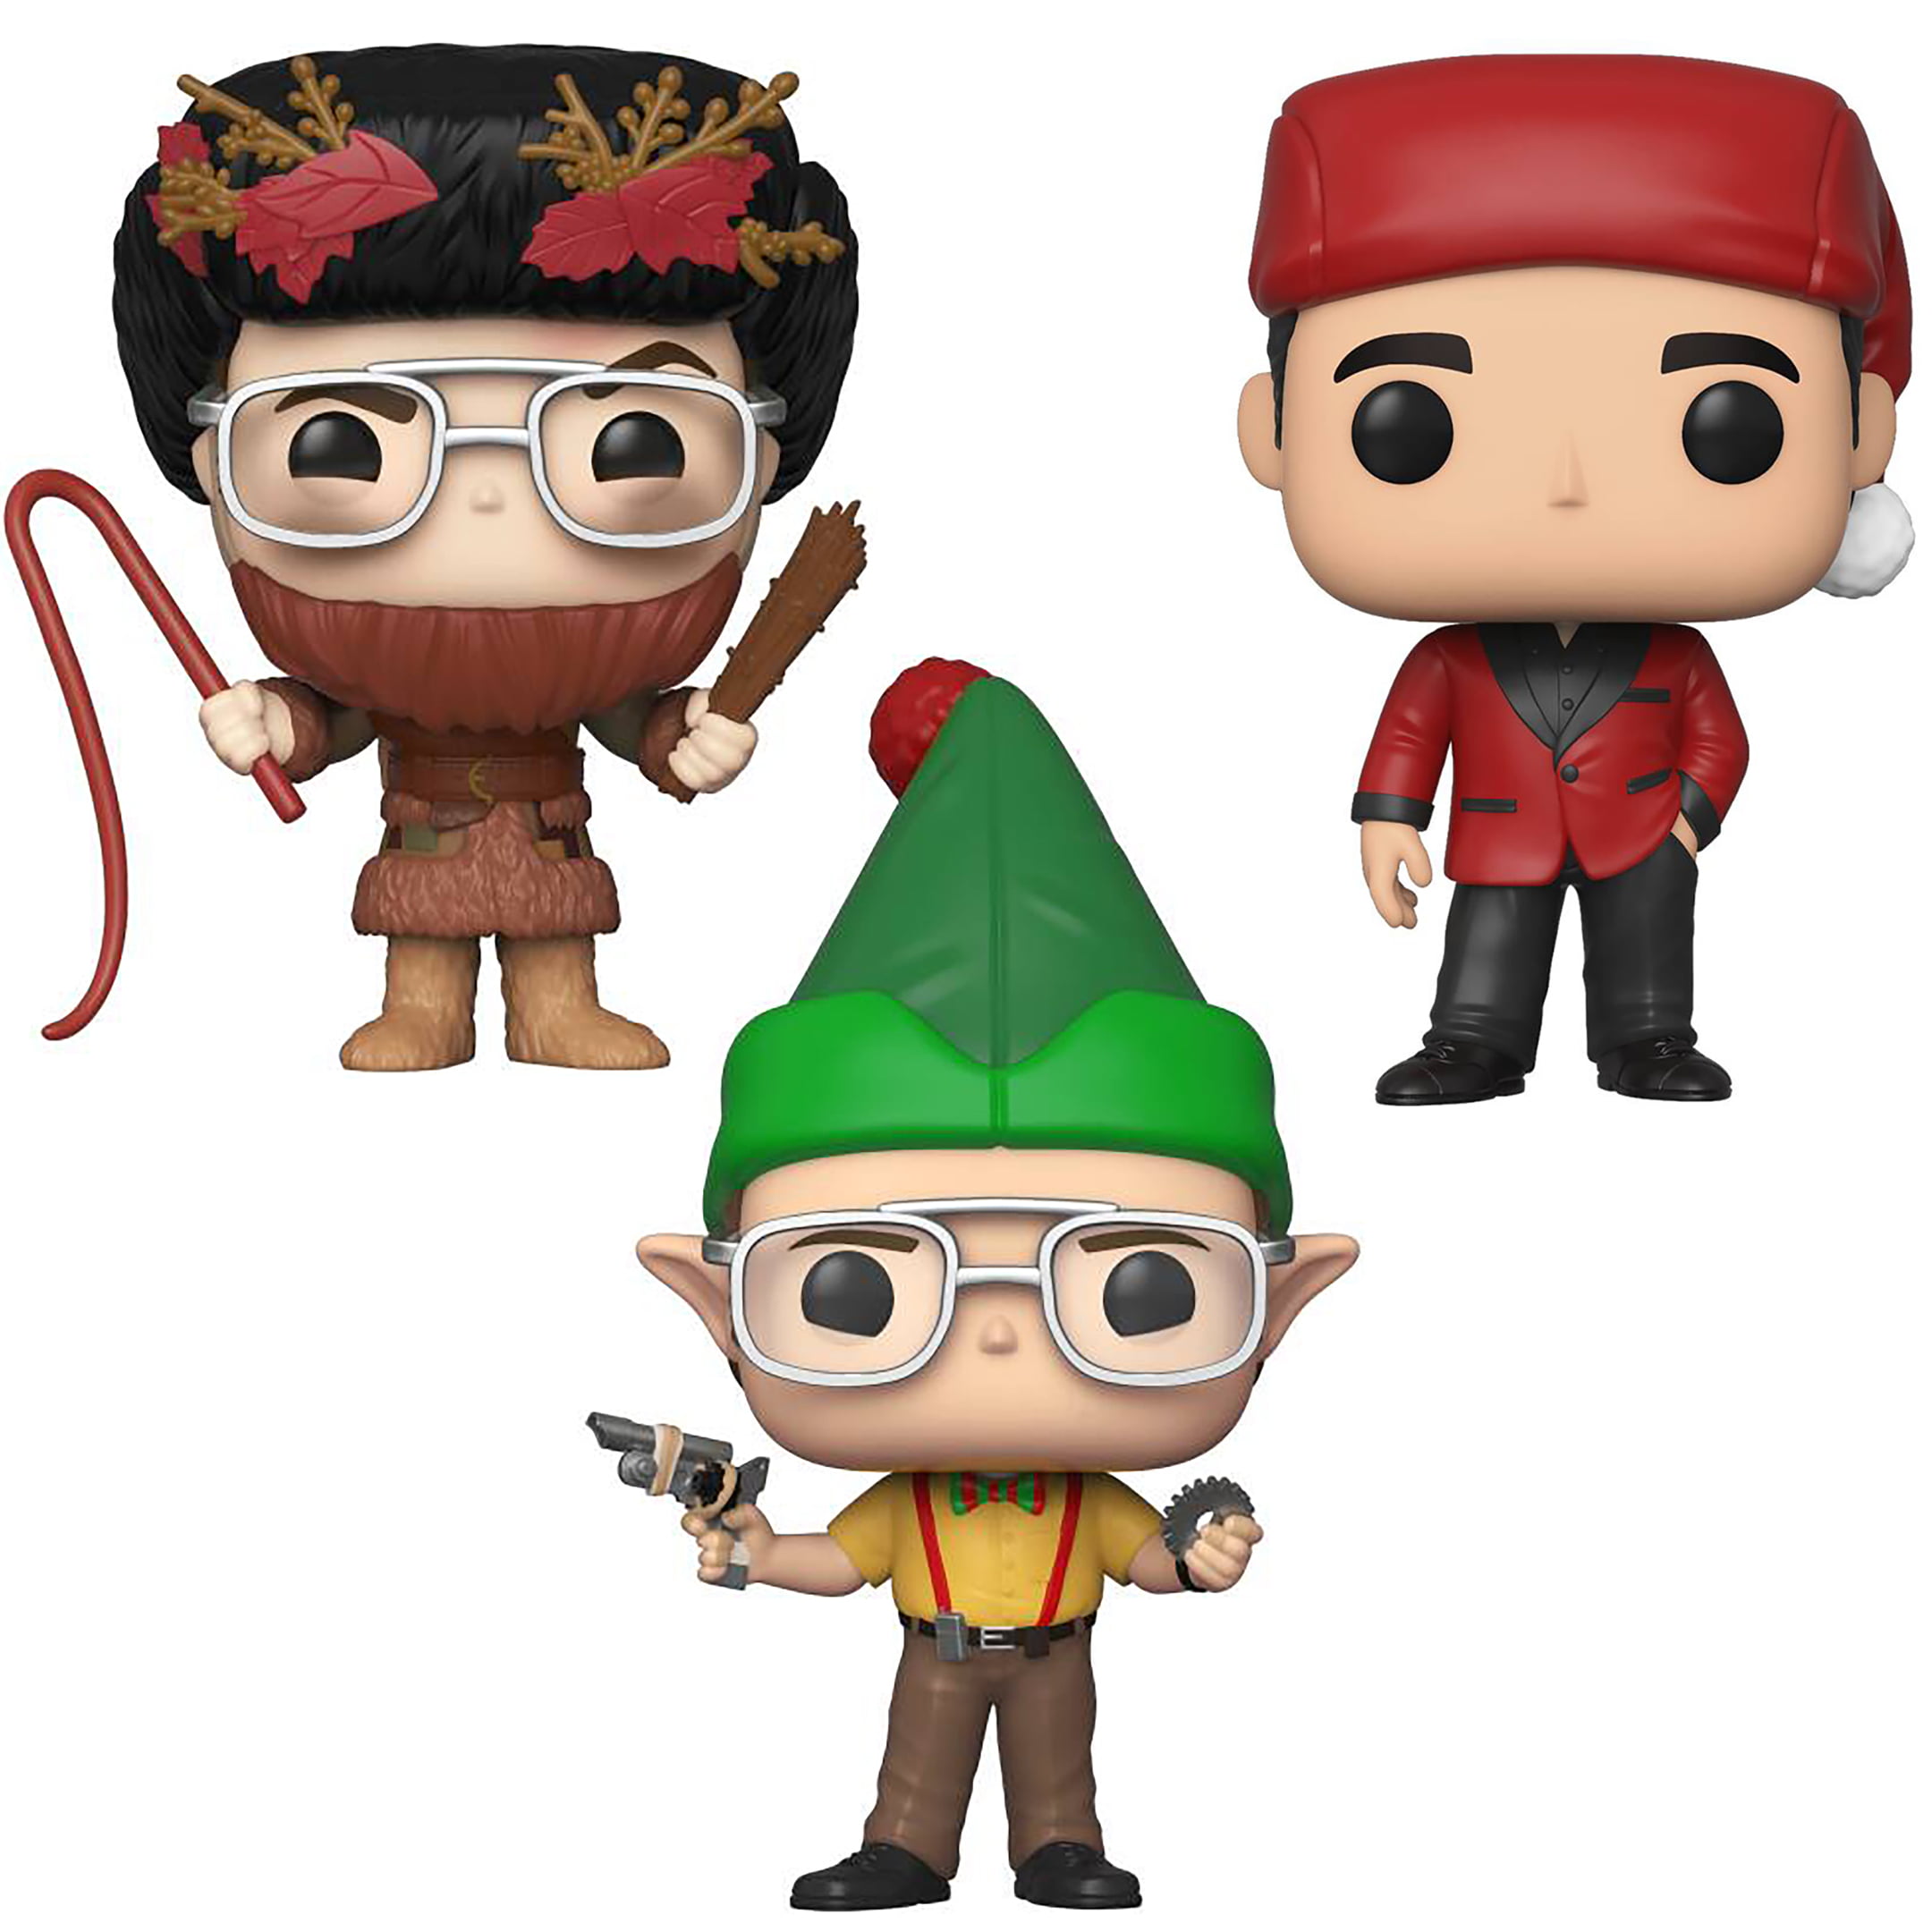 Funko POP! TV The Office Holiday Collectors Set - Dwight as Elf